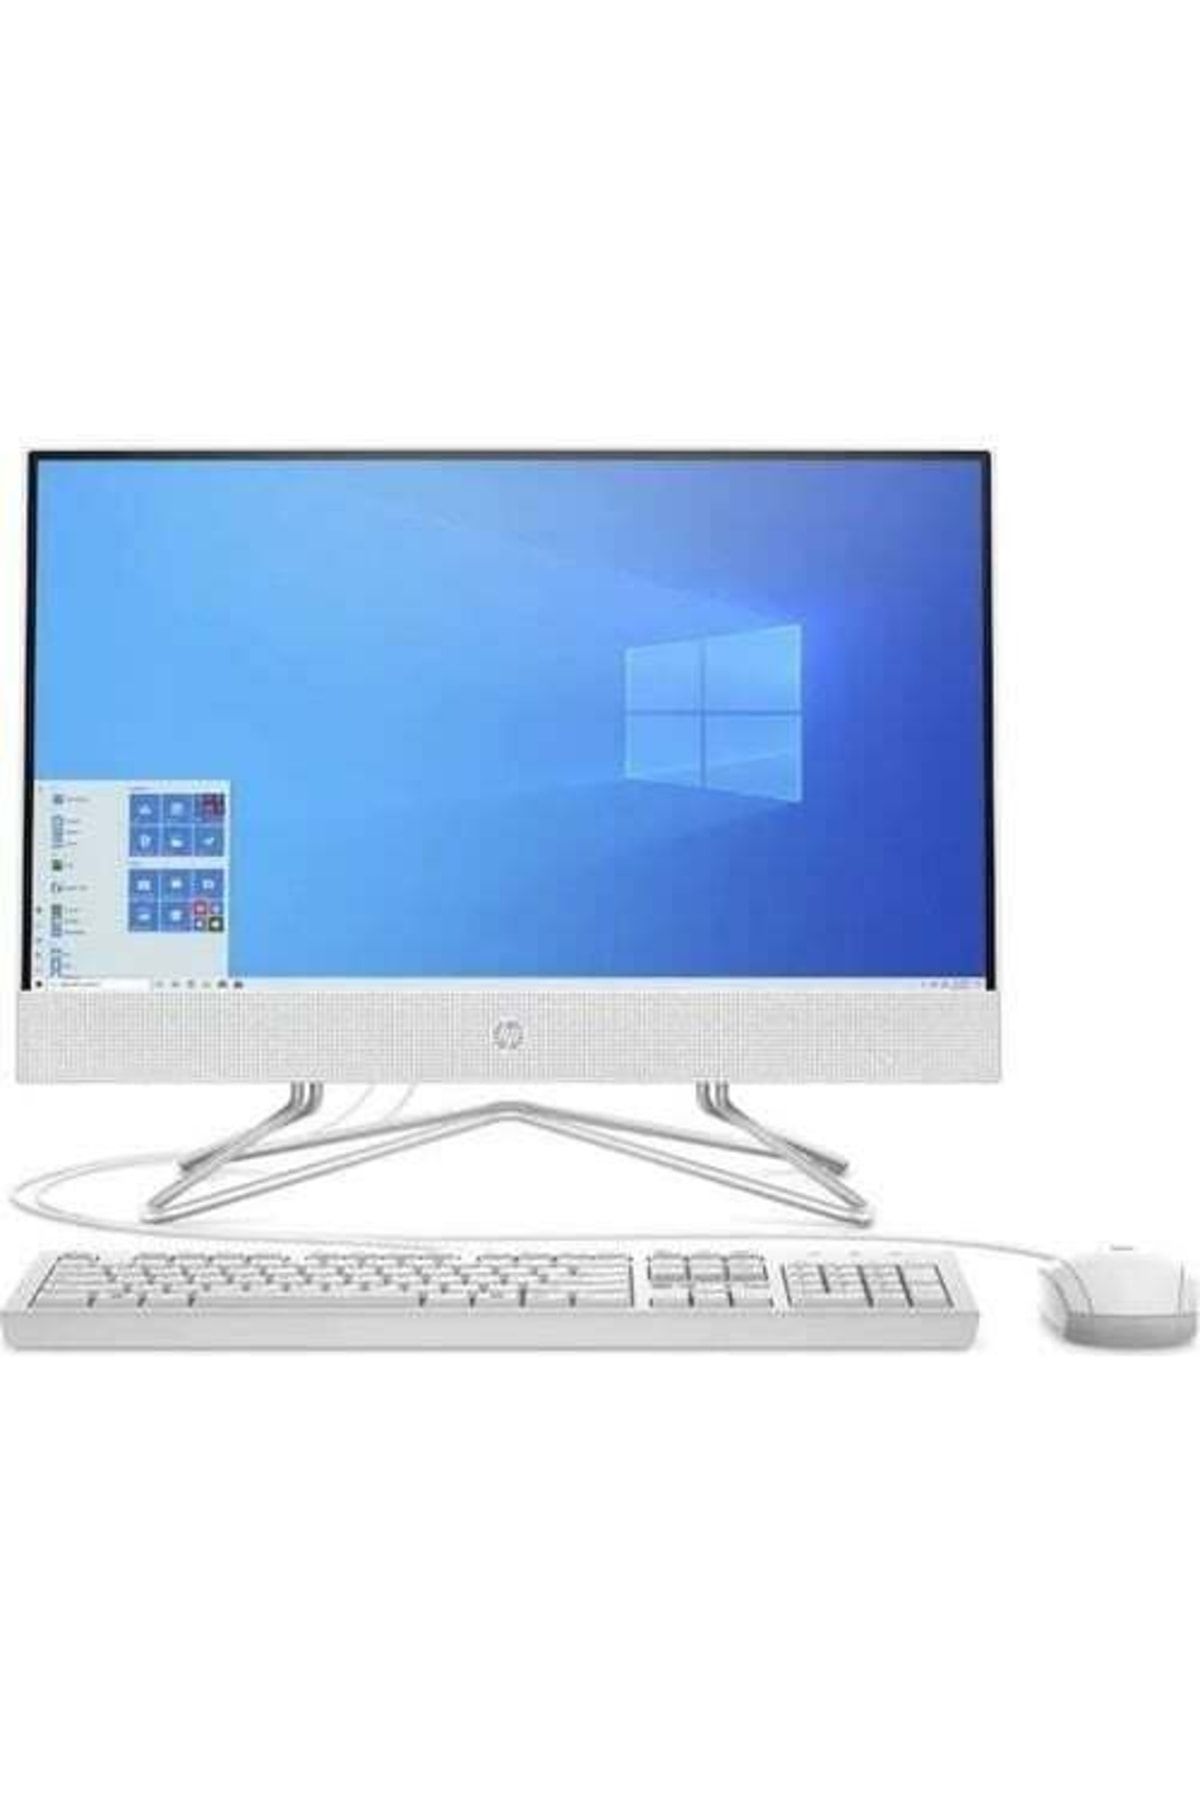 HP 200 G4 5w7p1es I5-1235u 8 Gb 256 Gb Ssd Iris Xe Graphics 21.5" Full Hd All In One Pc